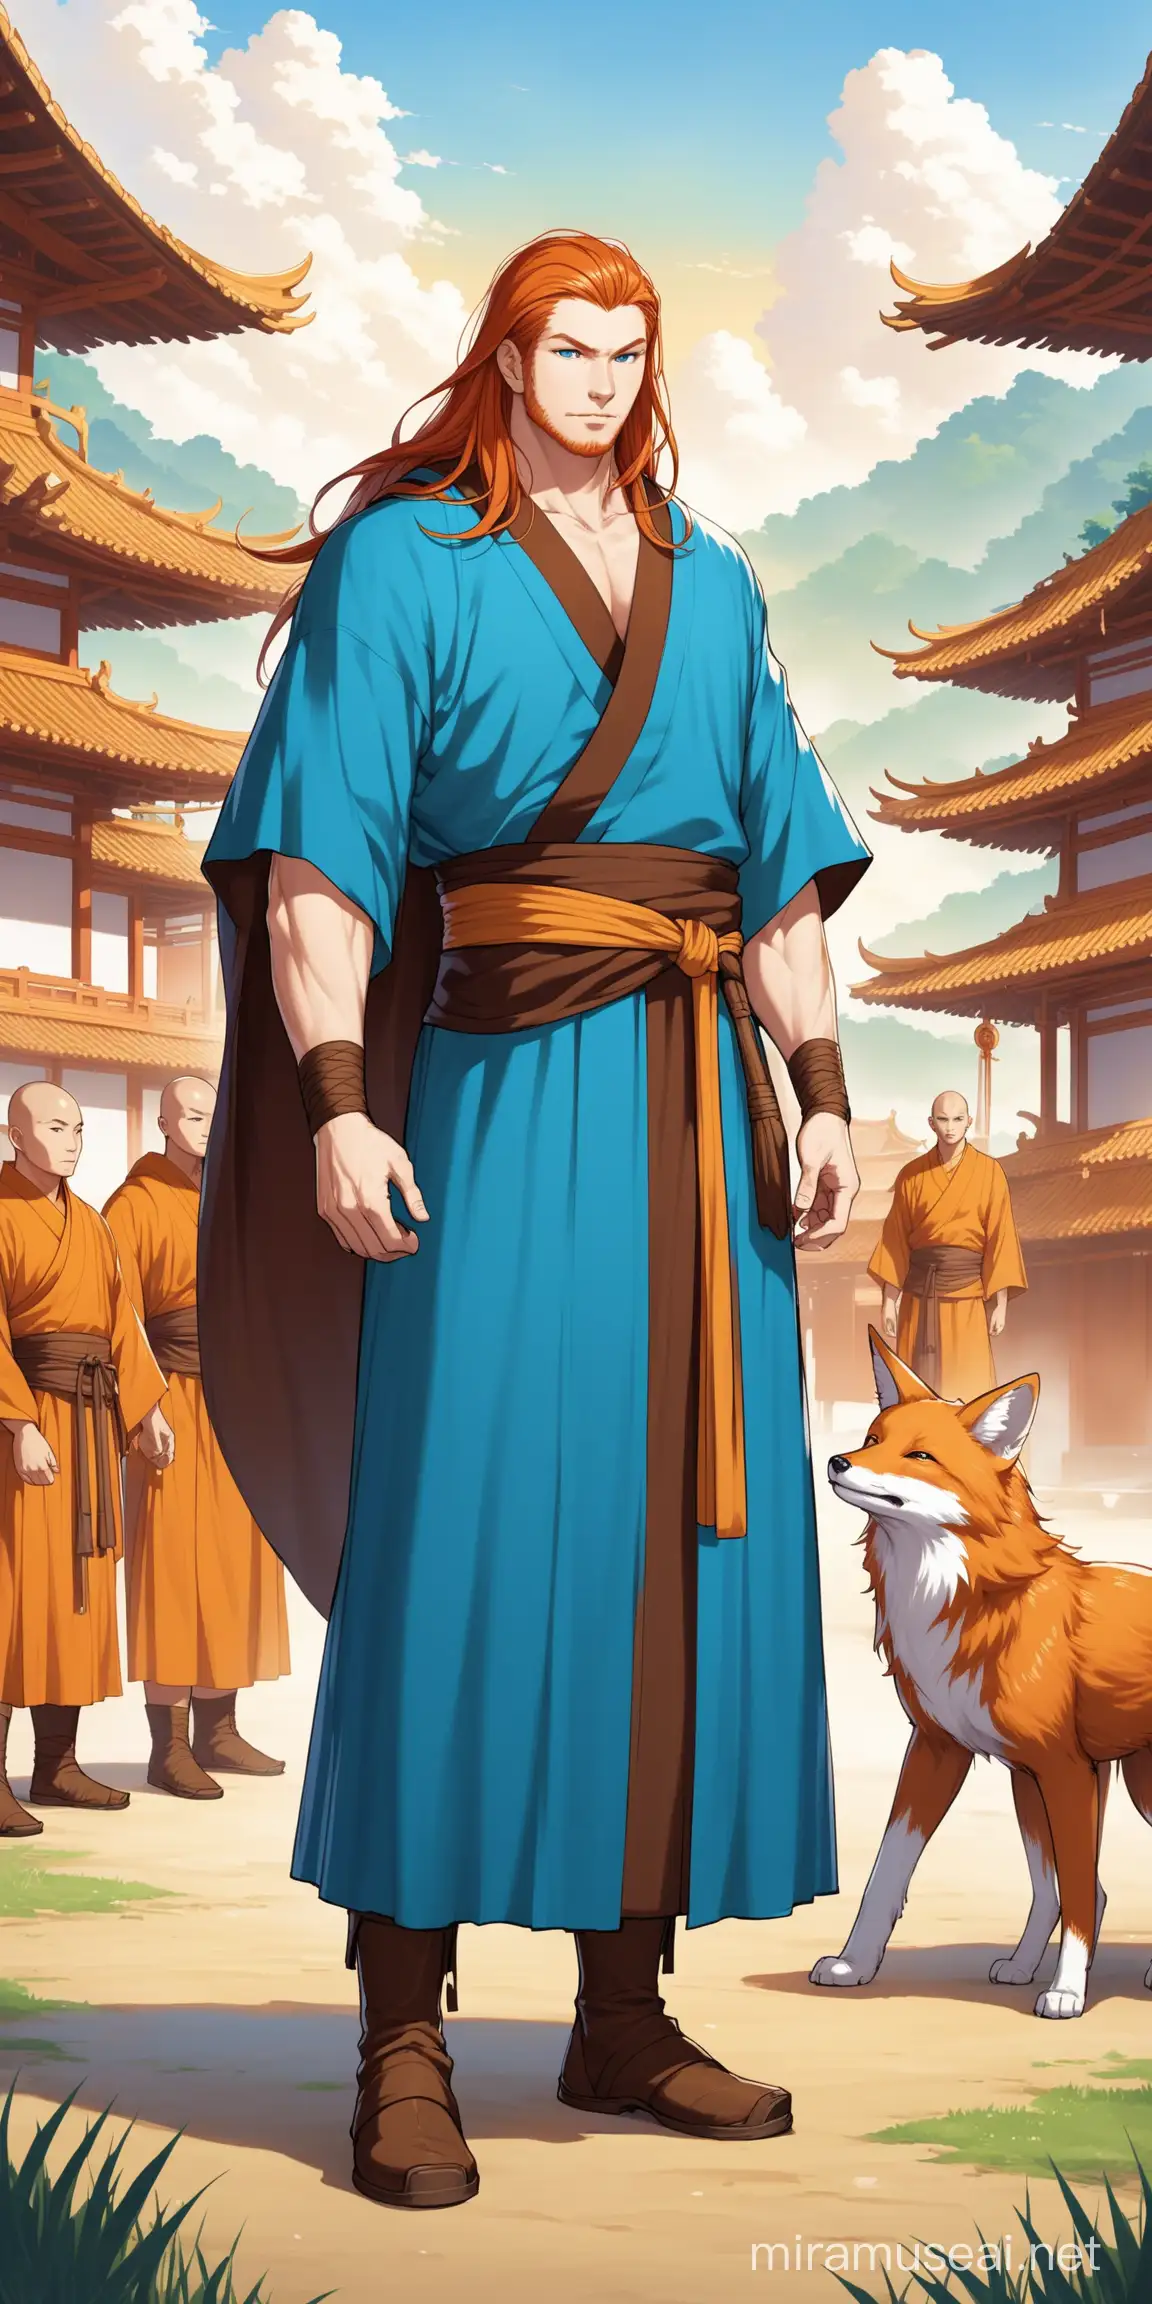 Warrior Monk with Ginger Hair in Blue and White Robe